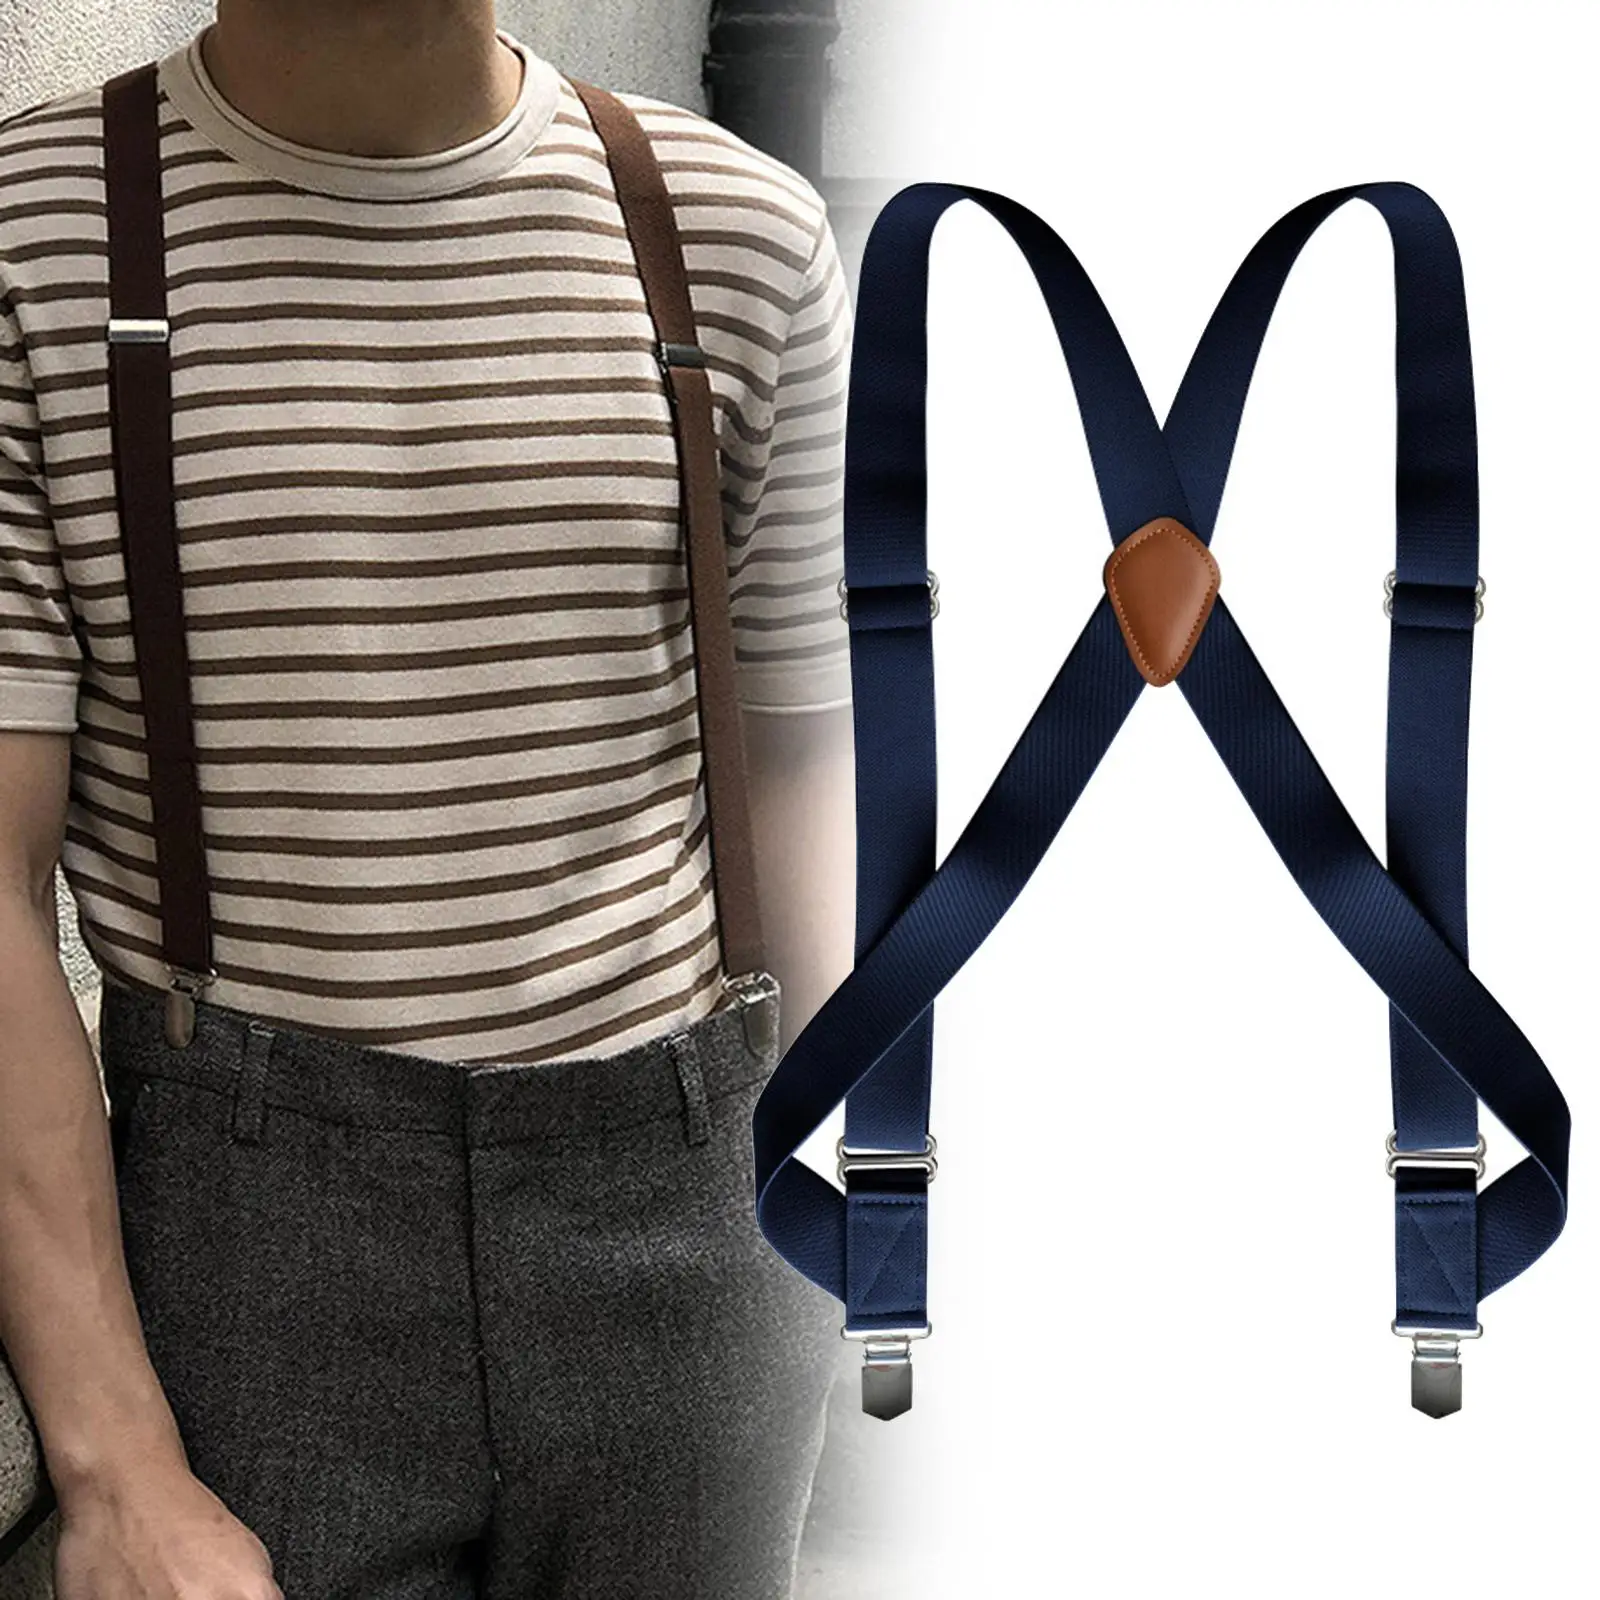 Mens Suspender with Clips Clothes Accessories Pants Holder Casual Work Suspenders for Boyfriends Wedding Trousers Friends Jeans